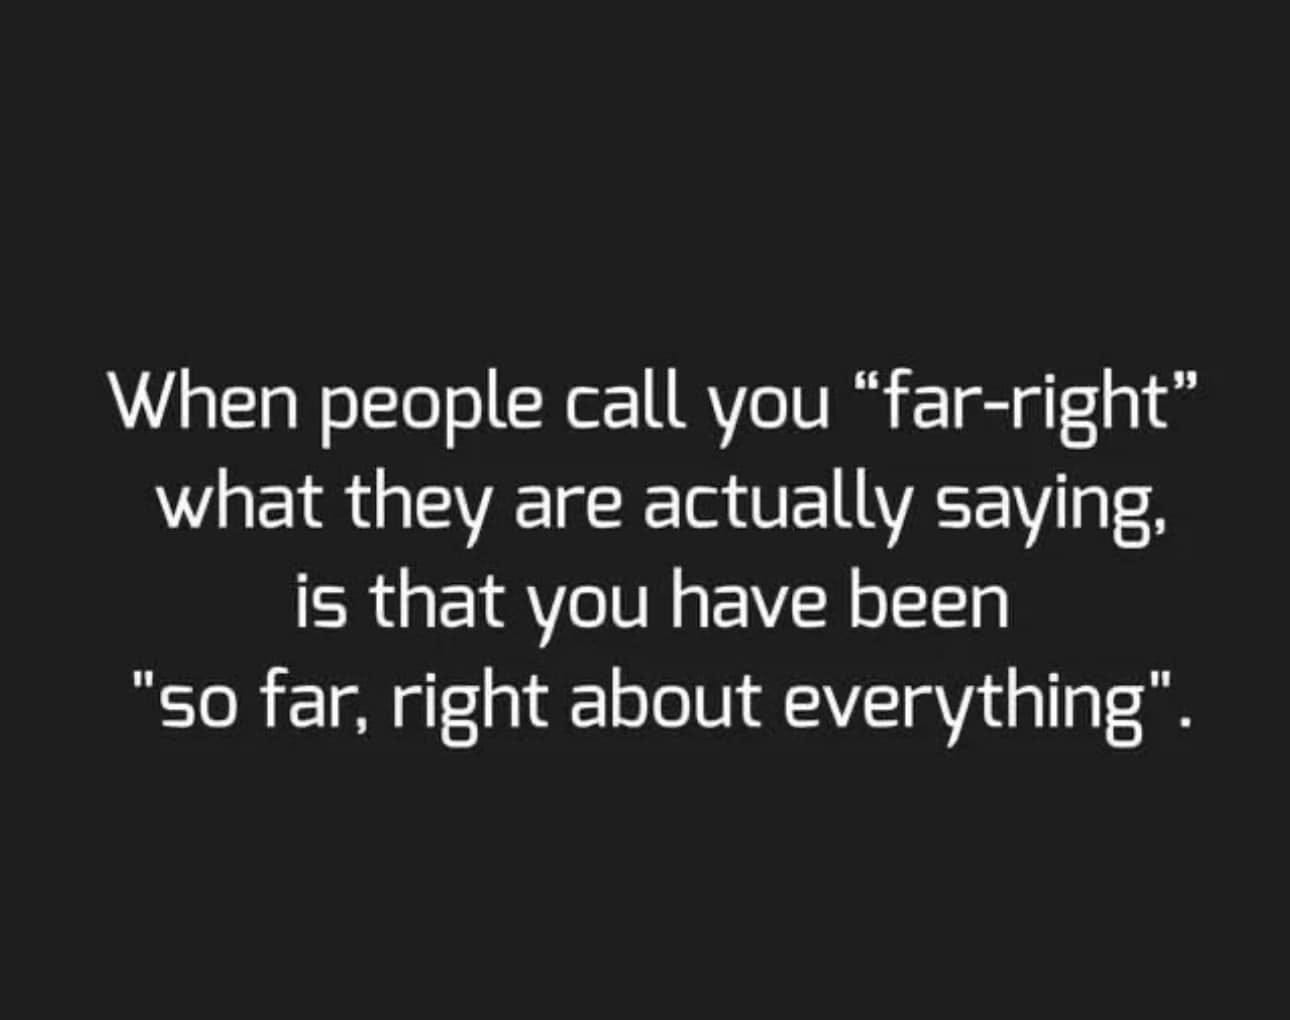 May be an image of text that says 'When people call you "far-right" what they are actually saying, is that you have been "so far, right about everything".'